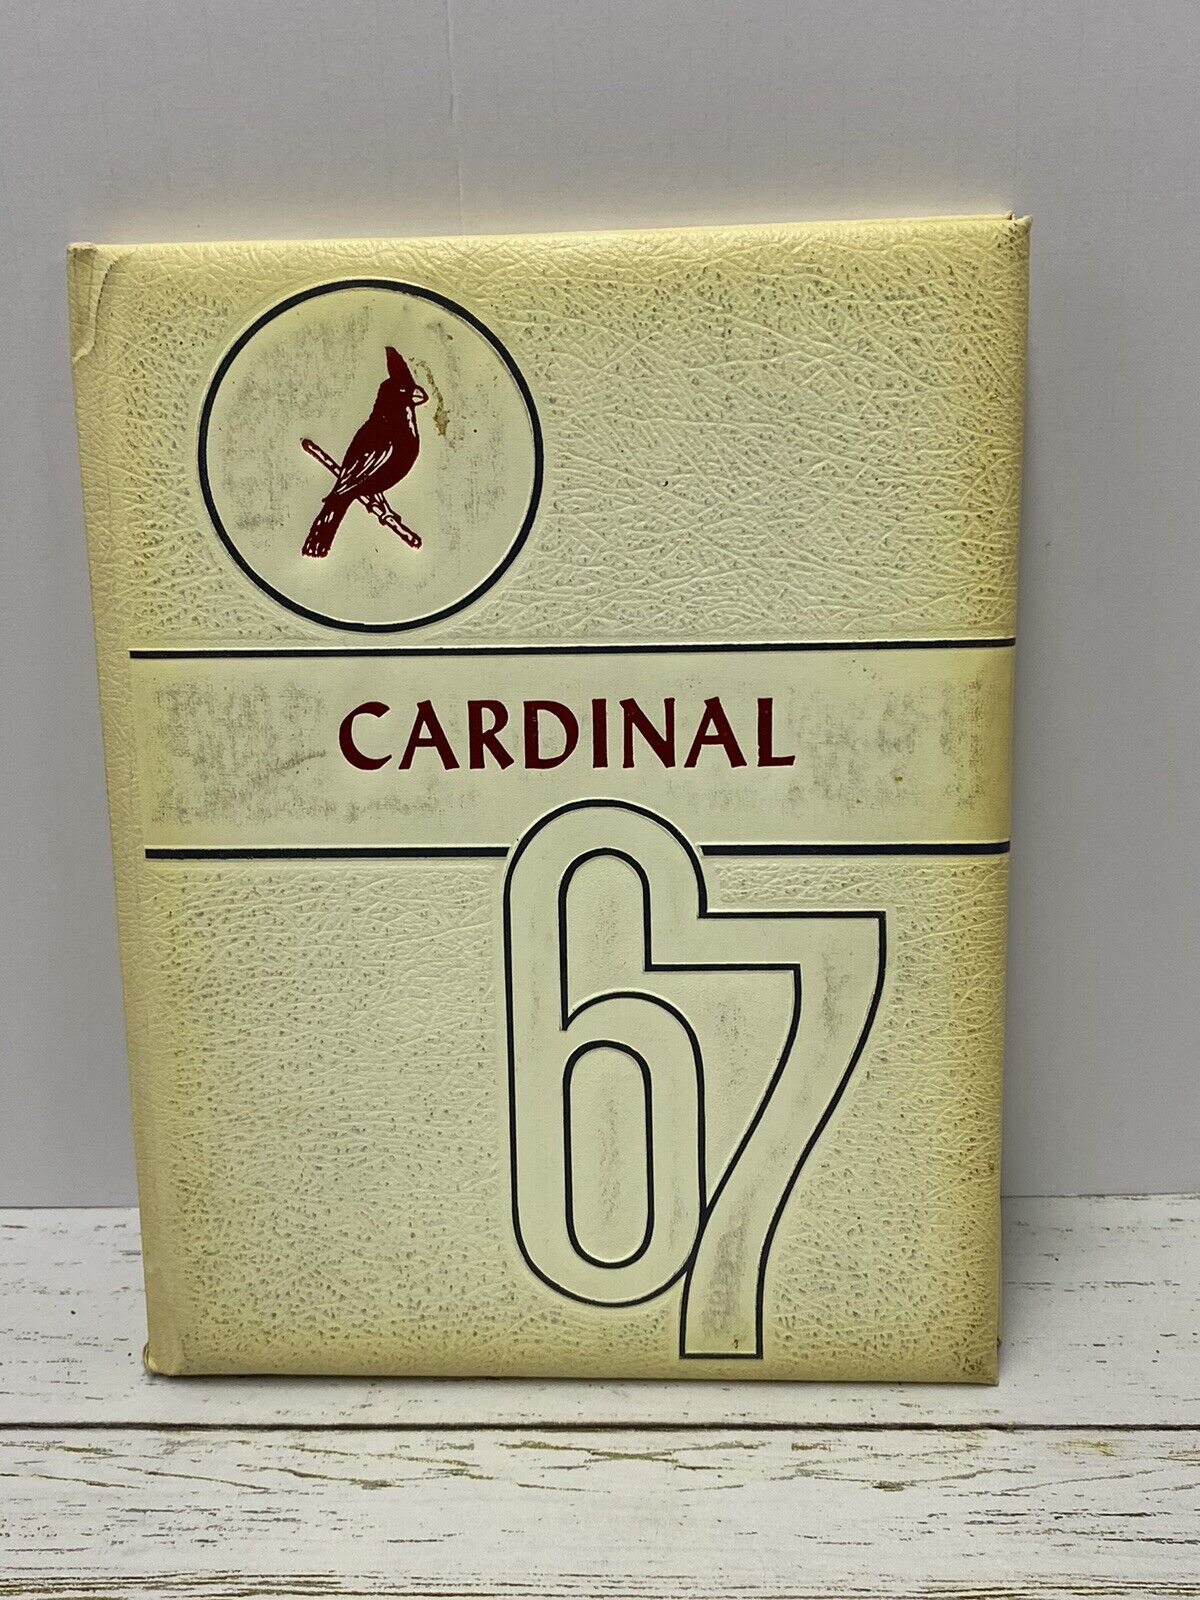 The Cardinal 1967: Mayfield High School Yearbook (1967 Hardcover)